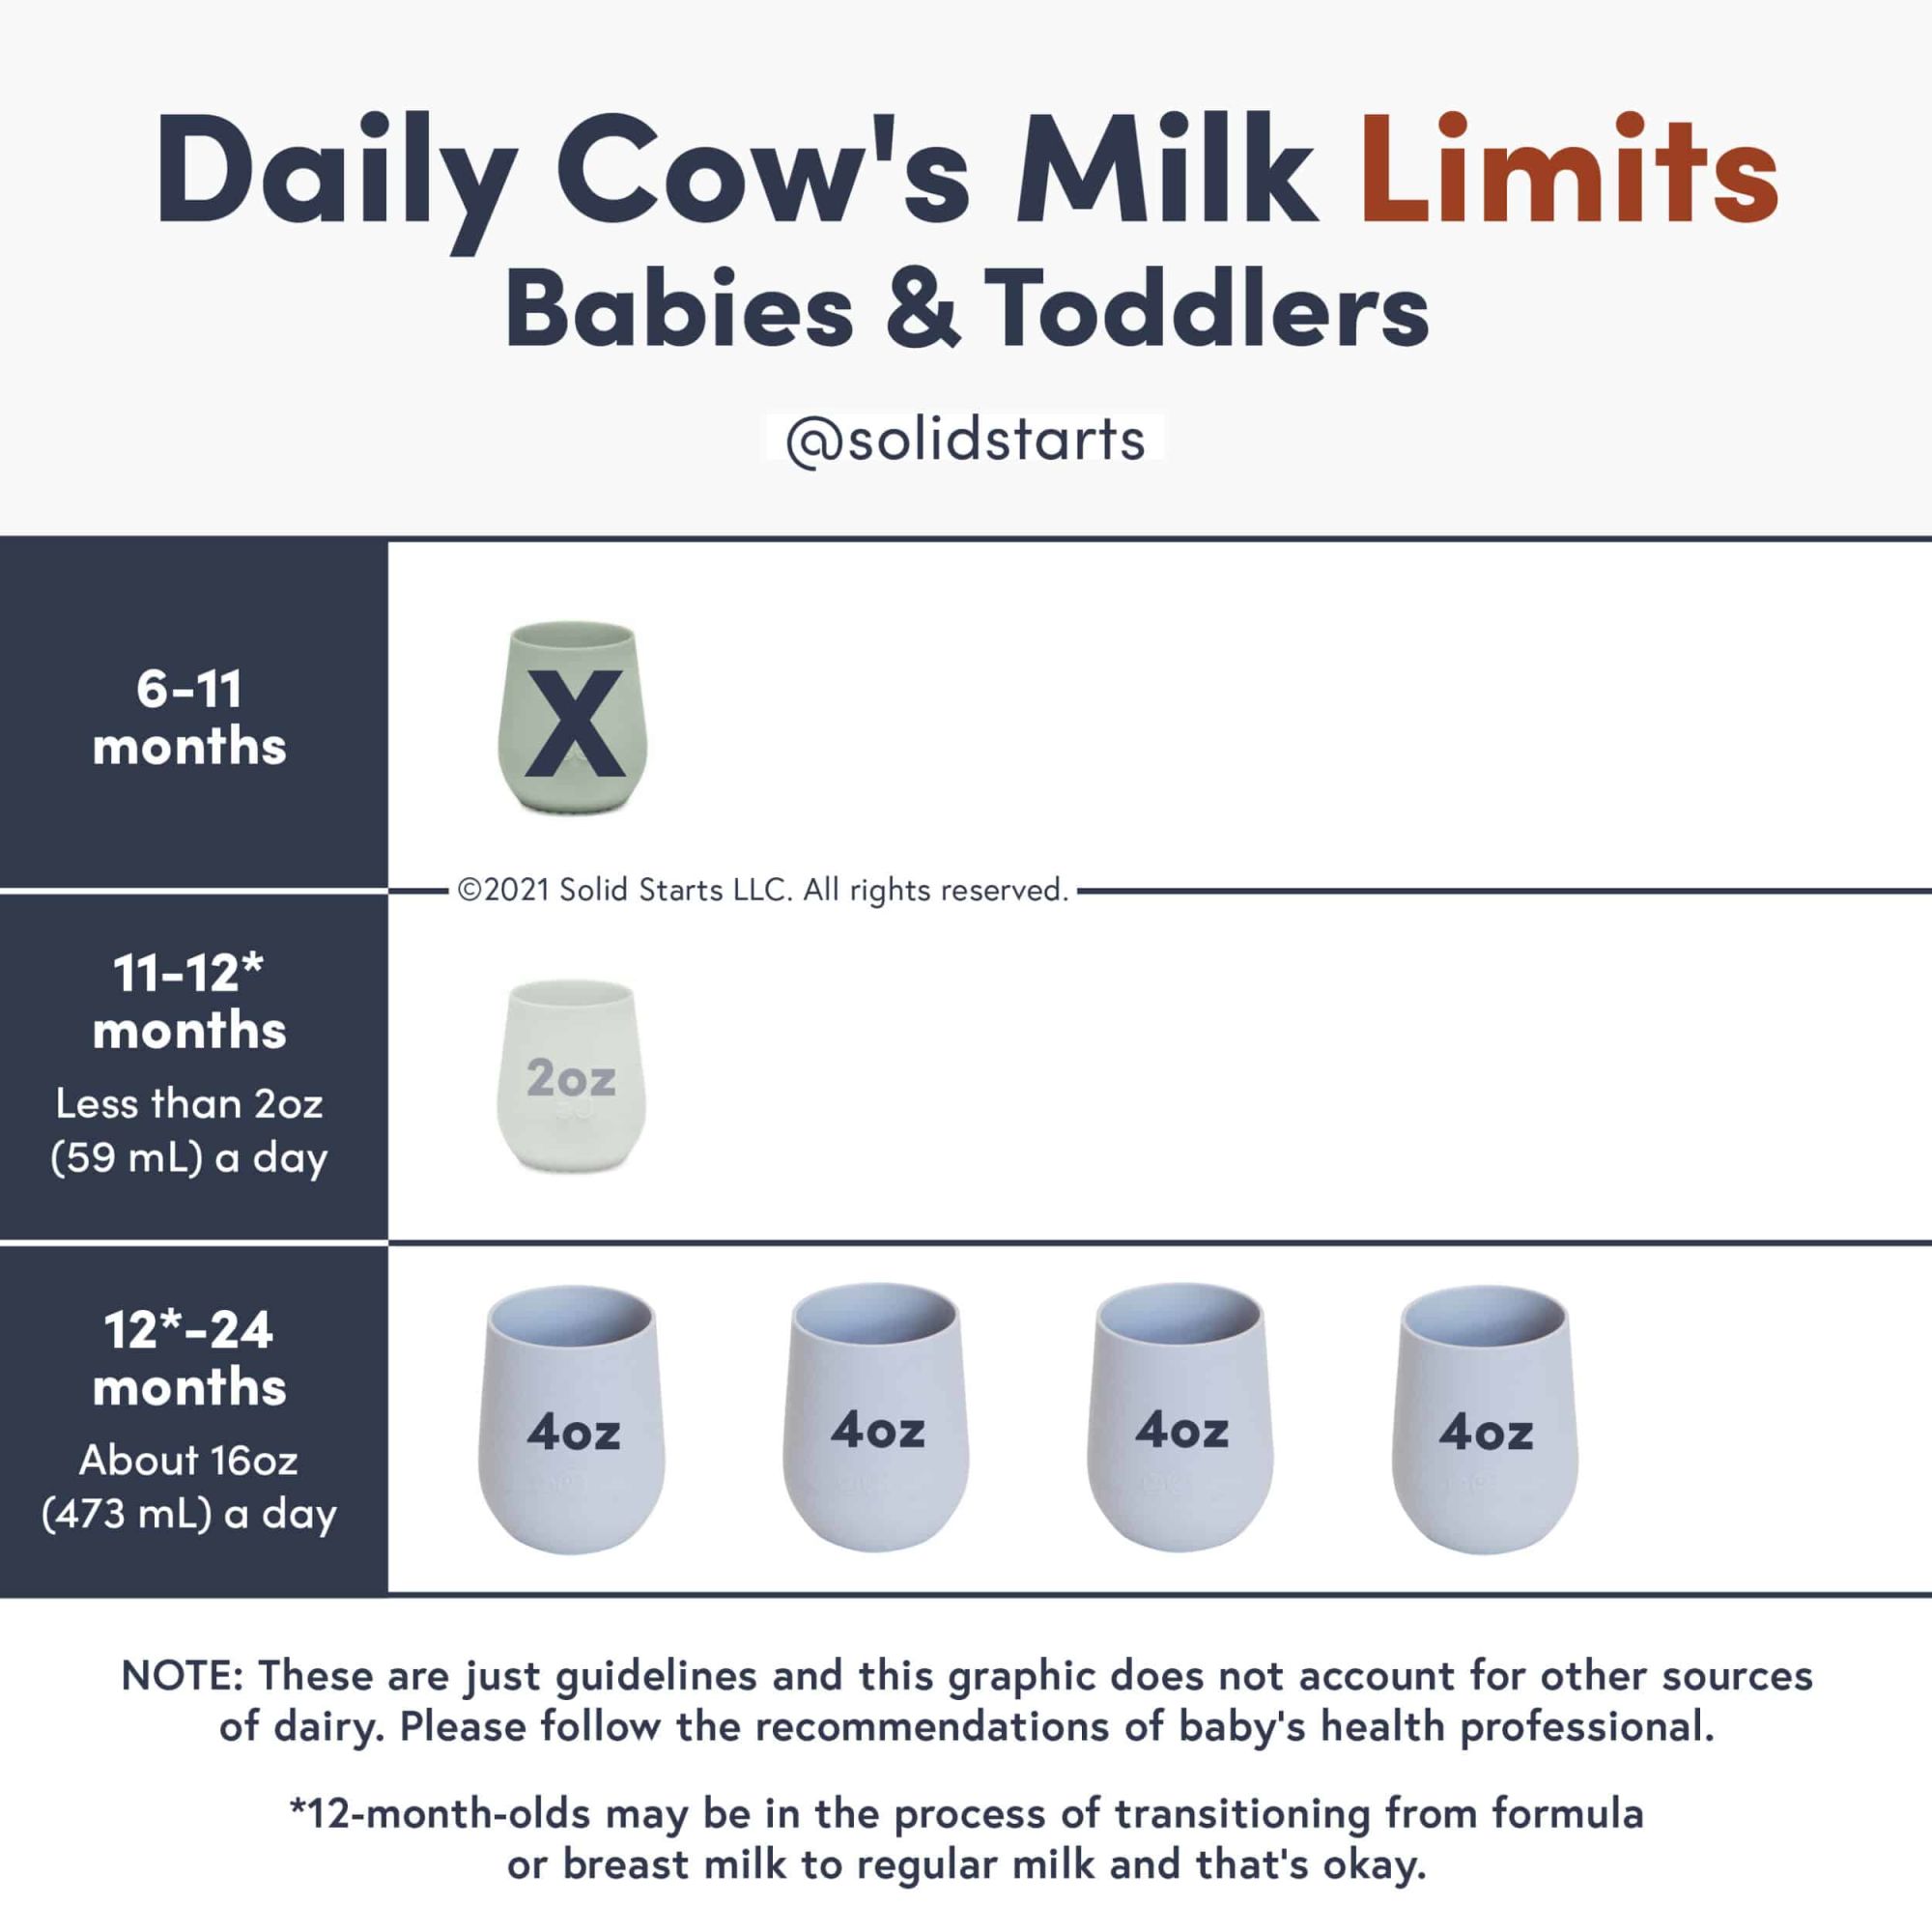 Daily Cow's Milk Limits for Babies and Toddlers